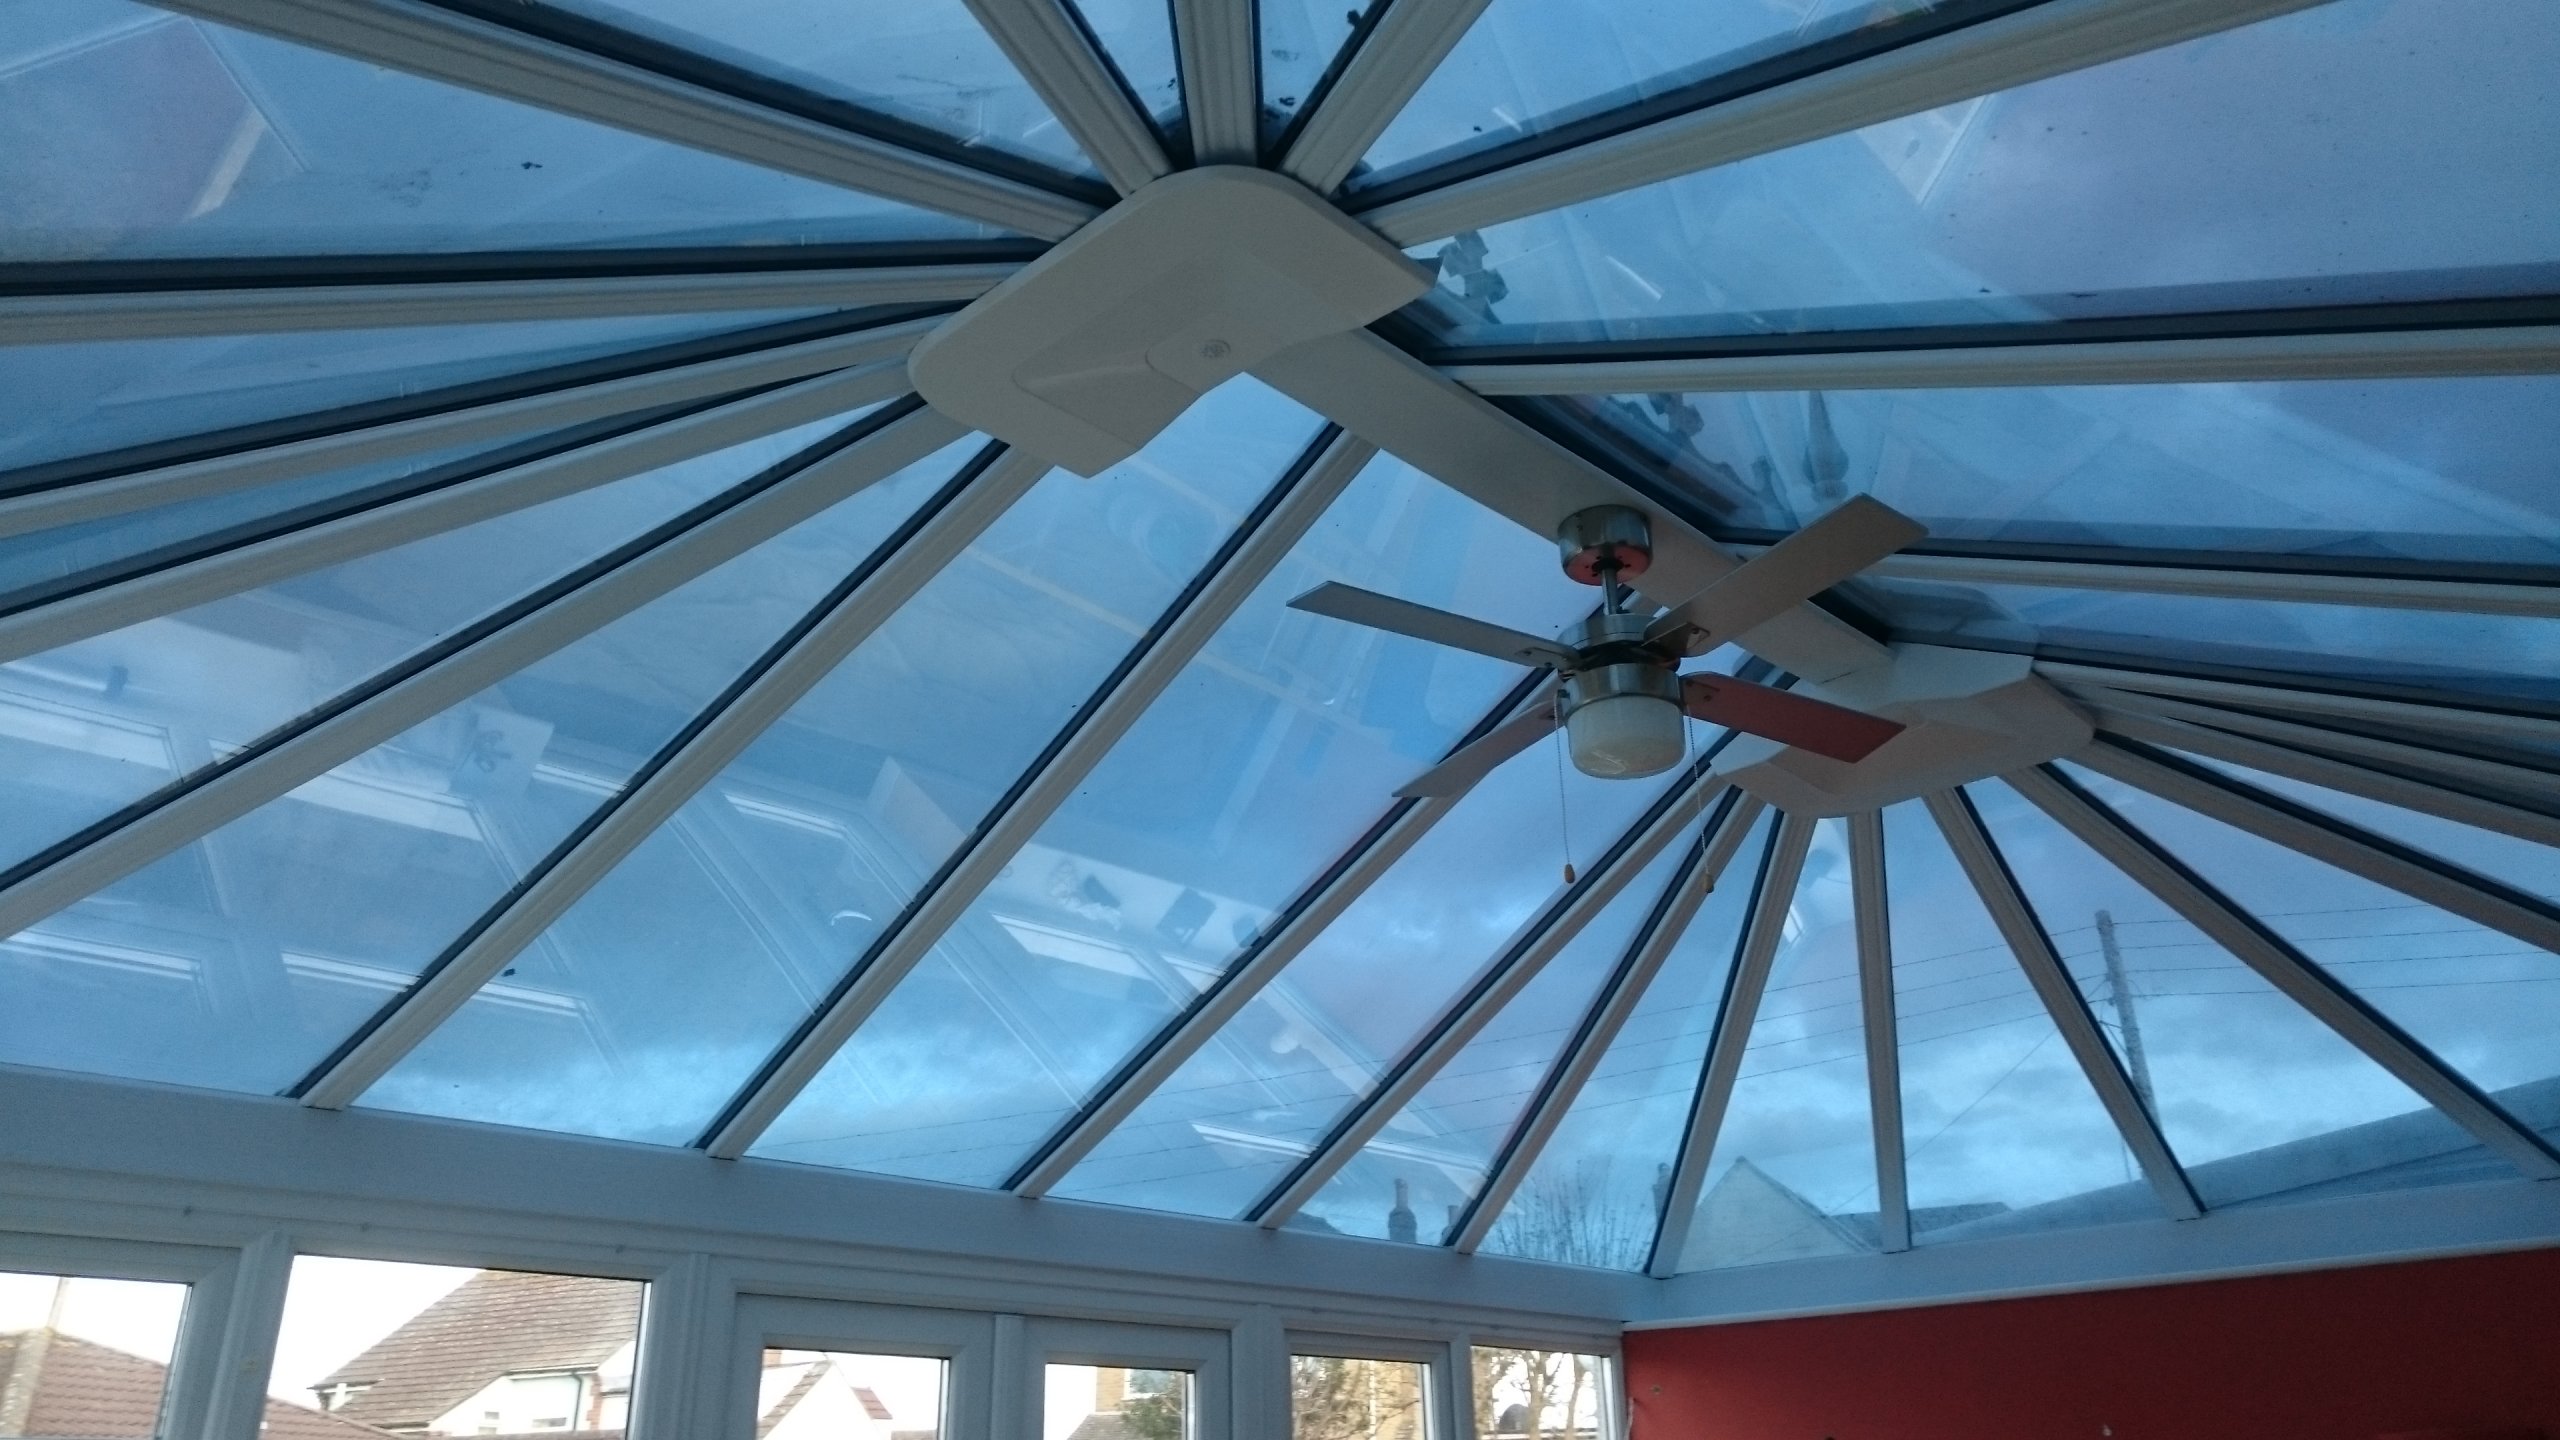 Dual 15 solar window film supplied and fitted to a conservatory roof in Weston-super-Mare. Installation by Tinting Express Barnstaple Devon.